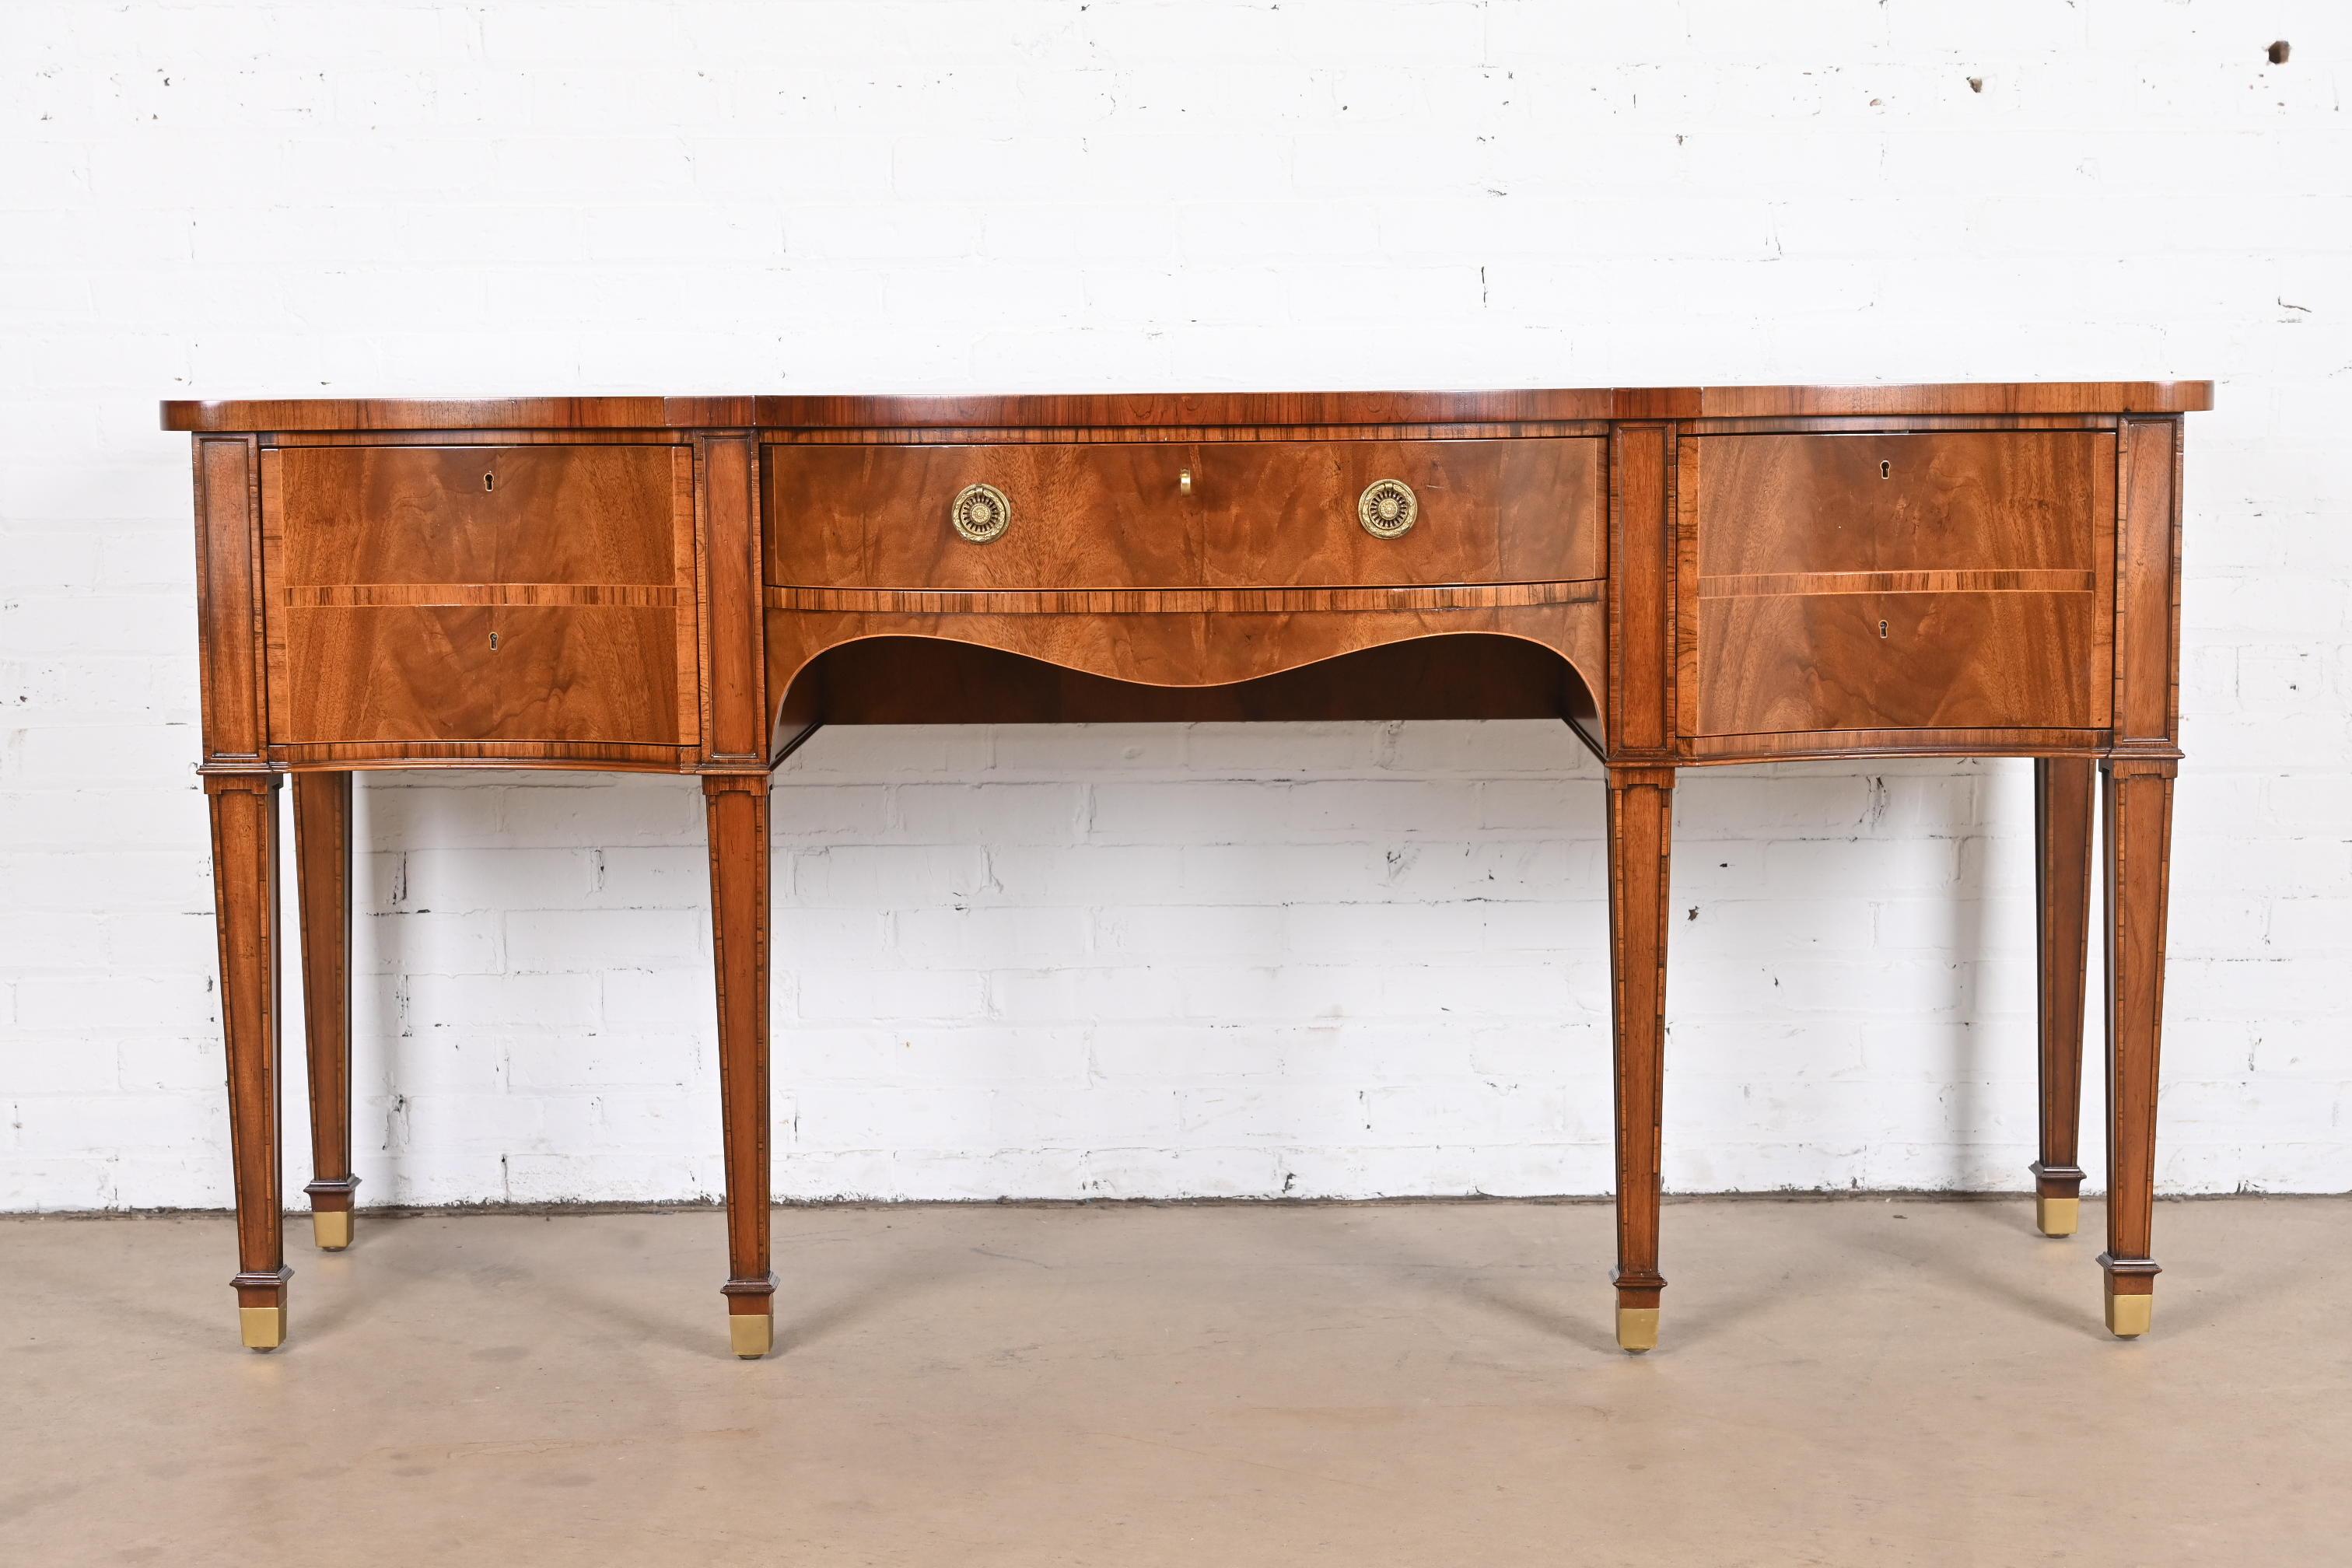 A rare and exceptional Georgian or Hepplewhite style sideboard or credenza

From the exclusive 